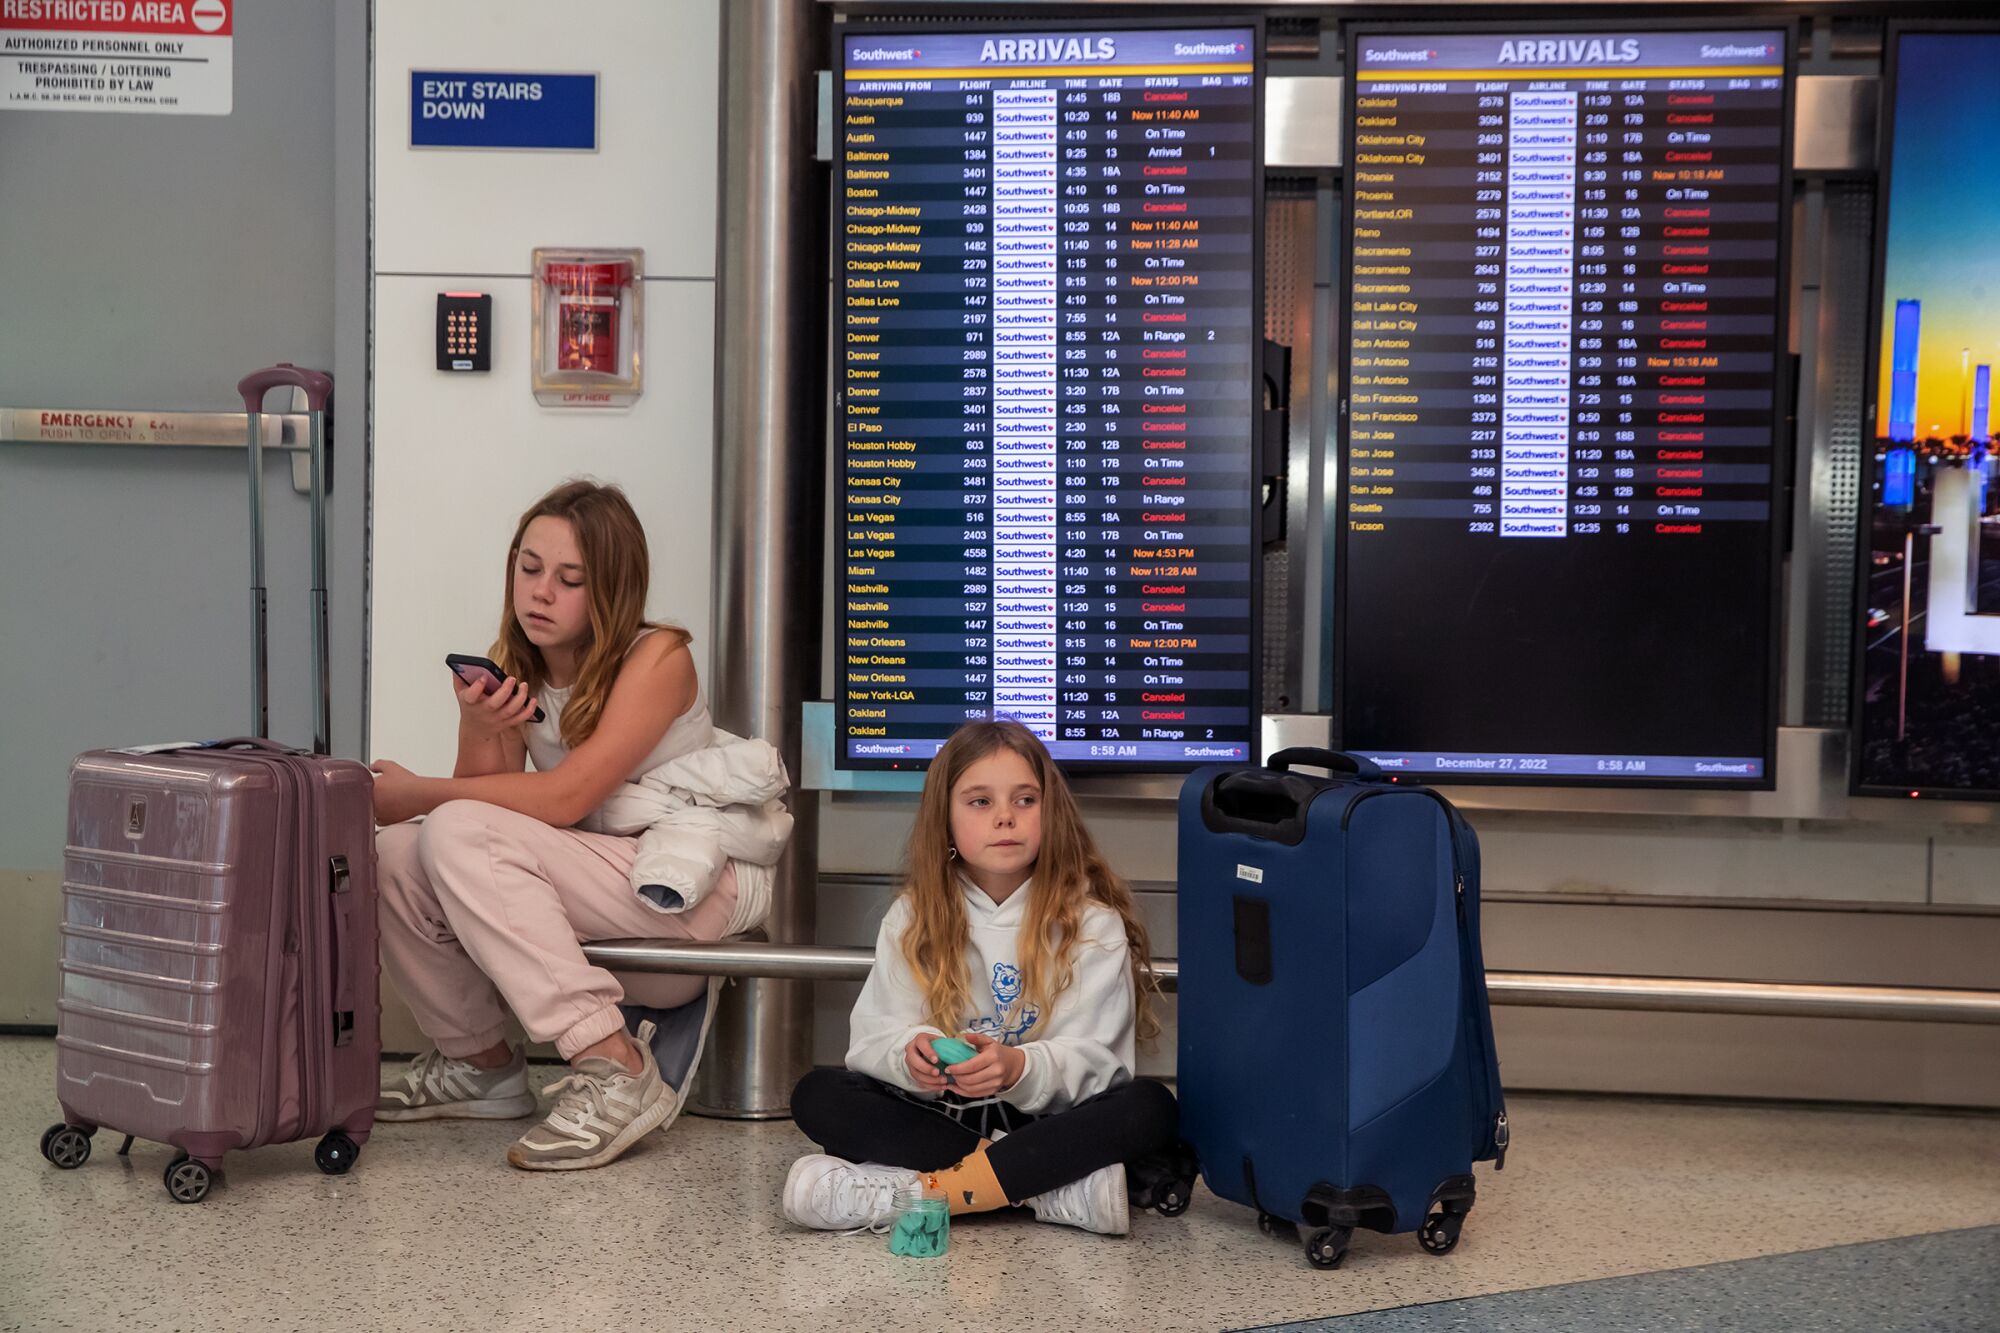 Two girls wait with their bags at an airport.